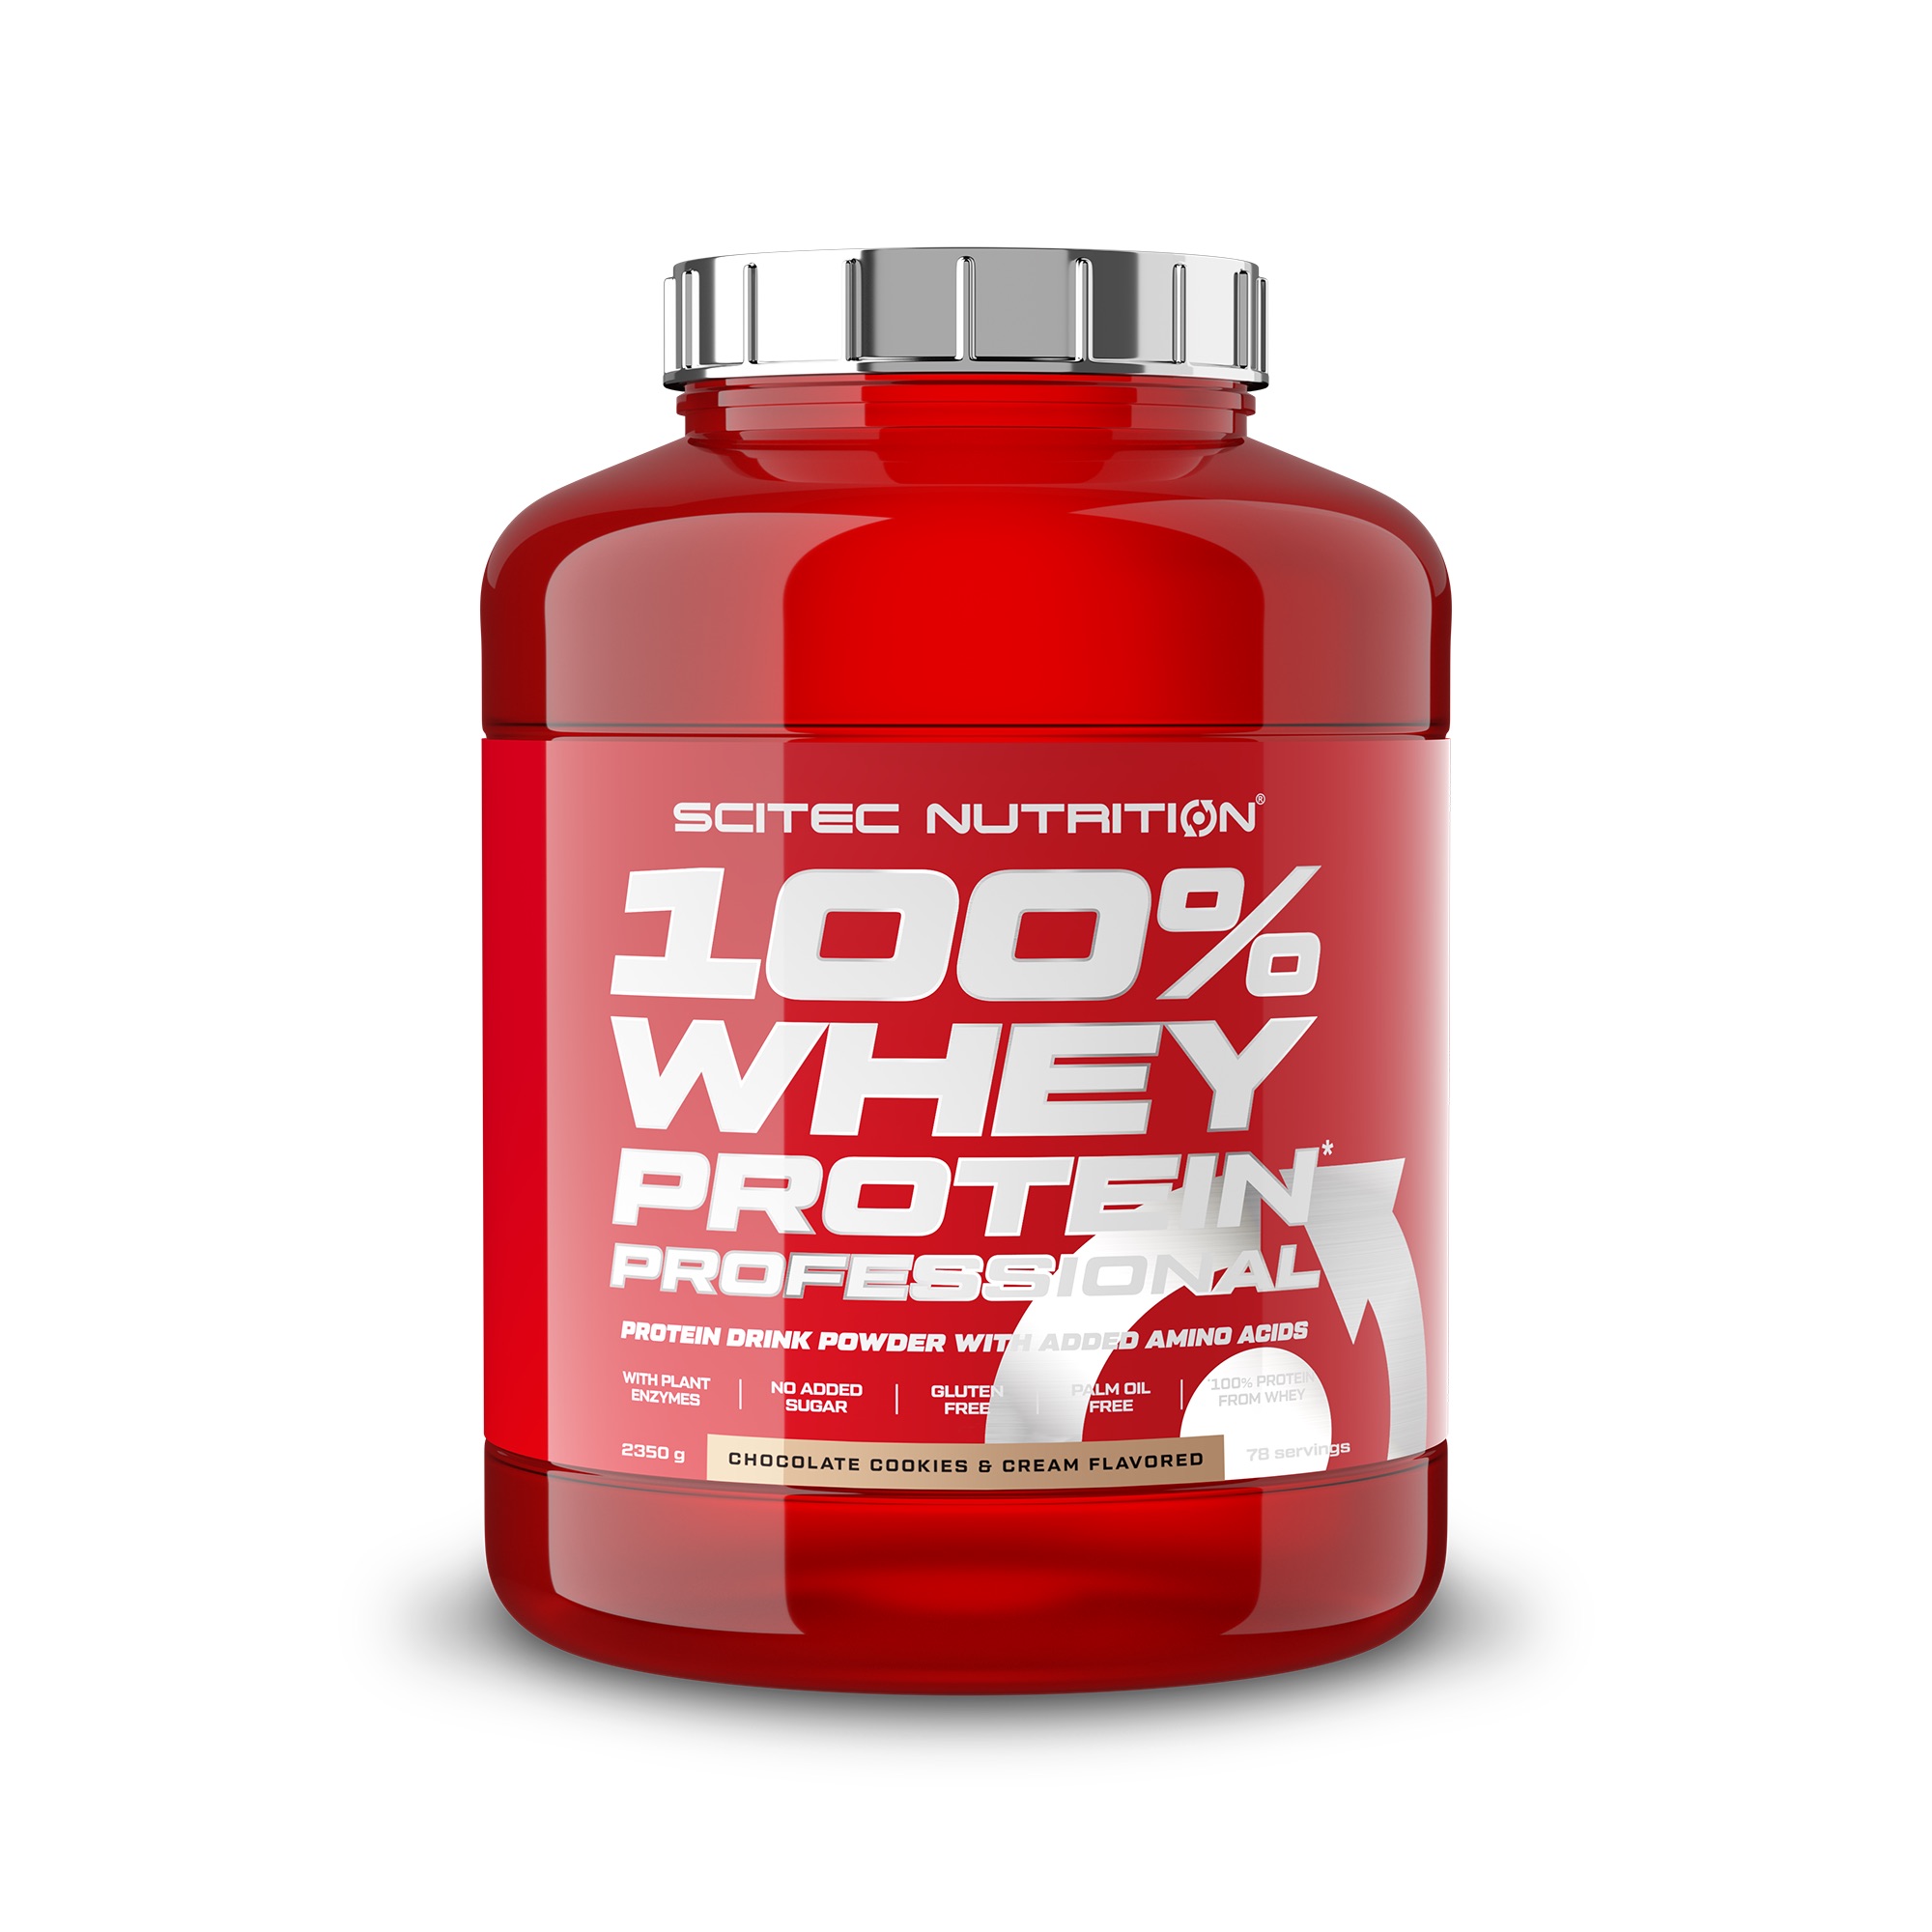 100% Whey Protein Professional 2.350 grs. Chocolate Cookies & Cream